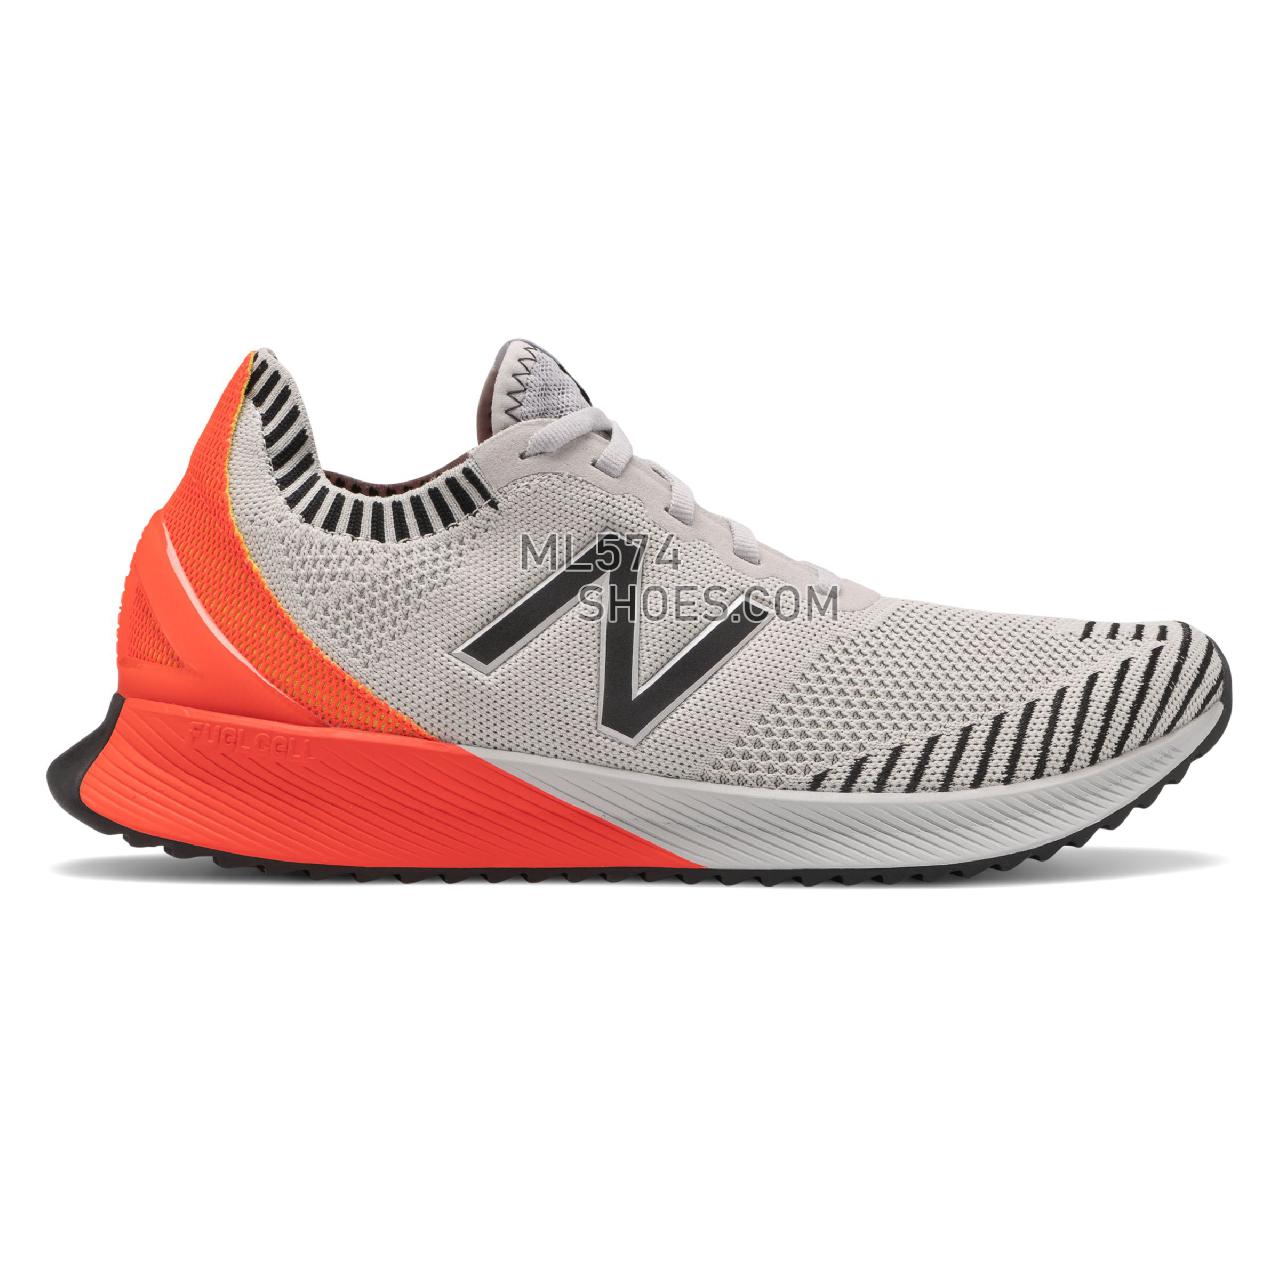 New Balance FuelCell Echo - Men's FuelCell Echo Running - Light Aluminum with Neo Flame - MFCECCG